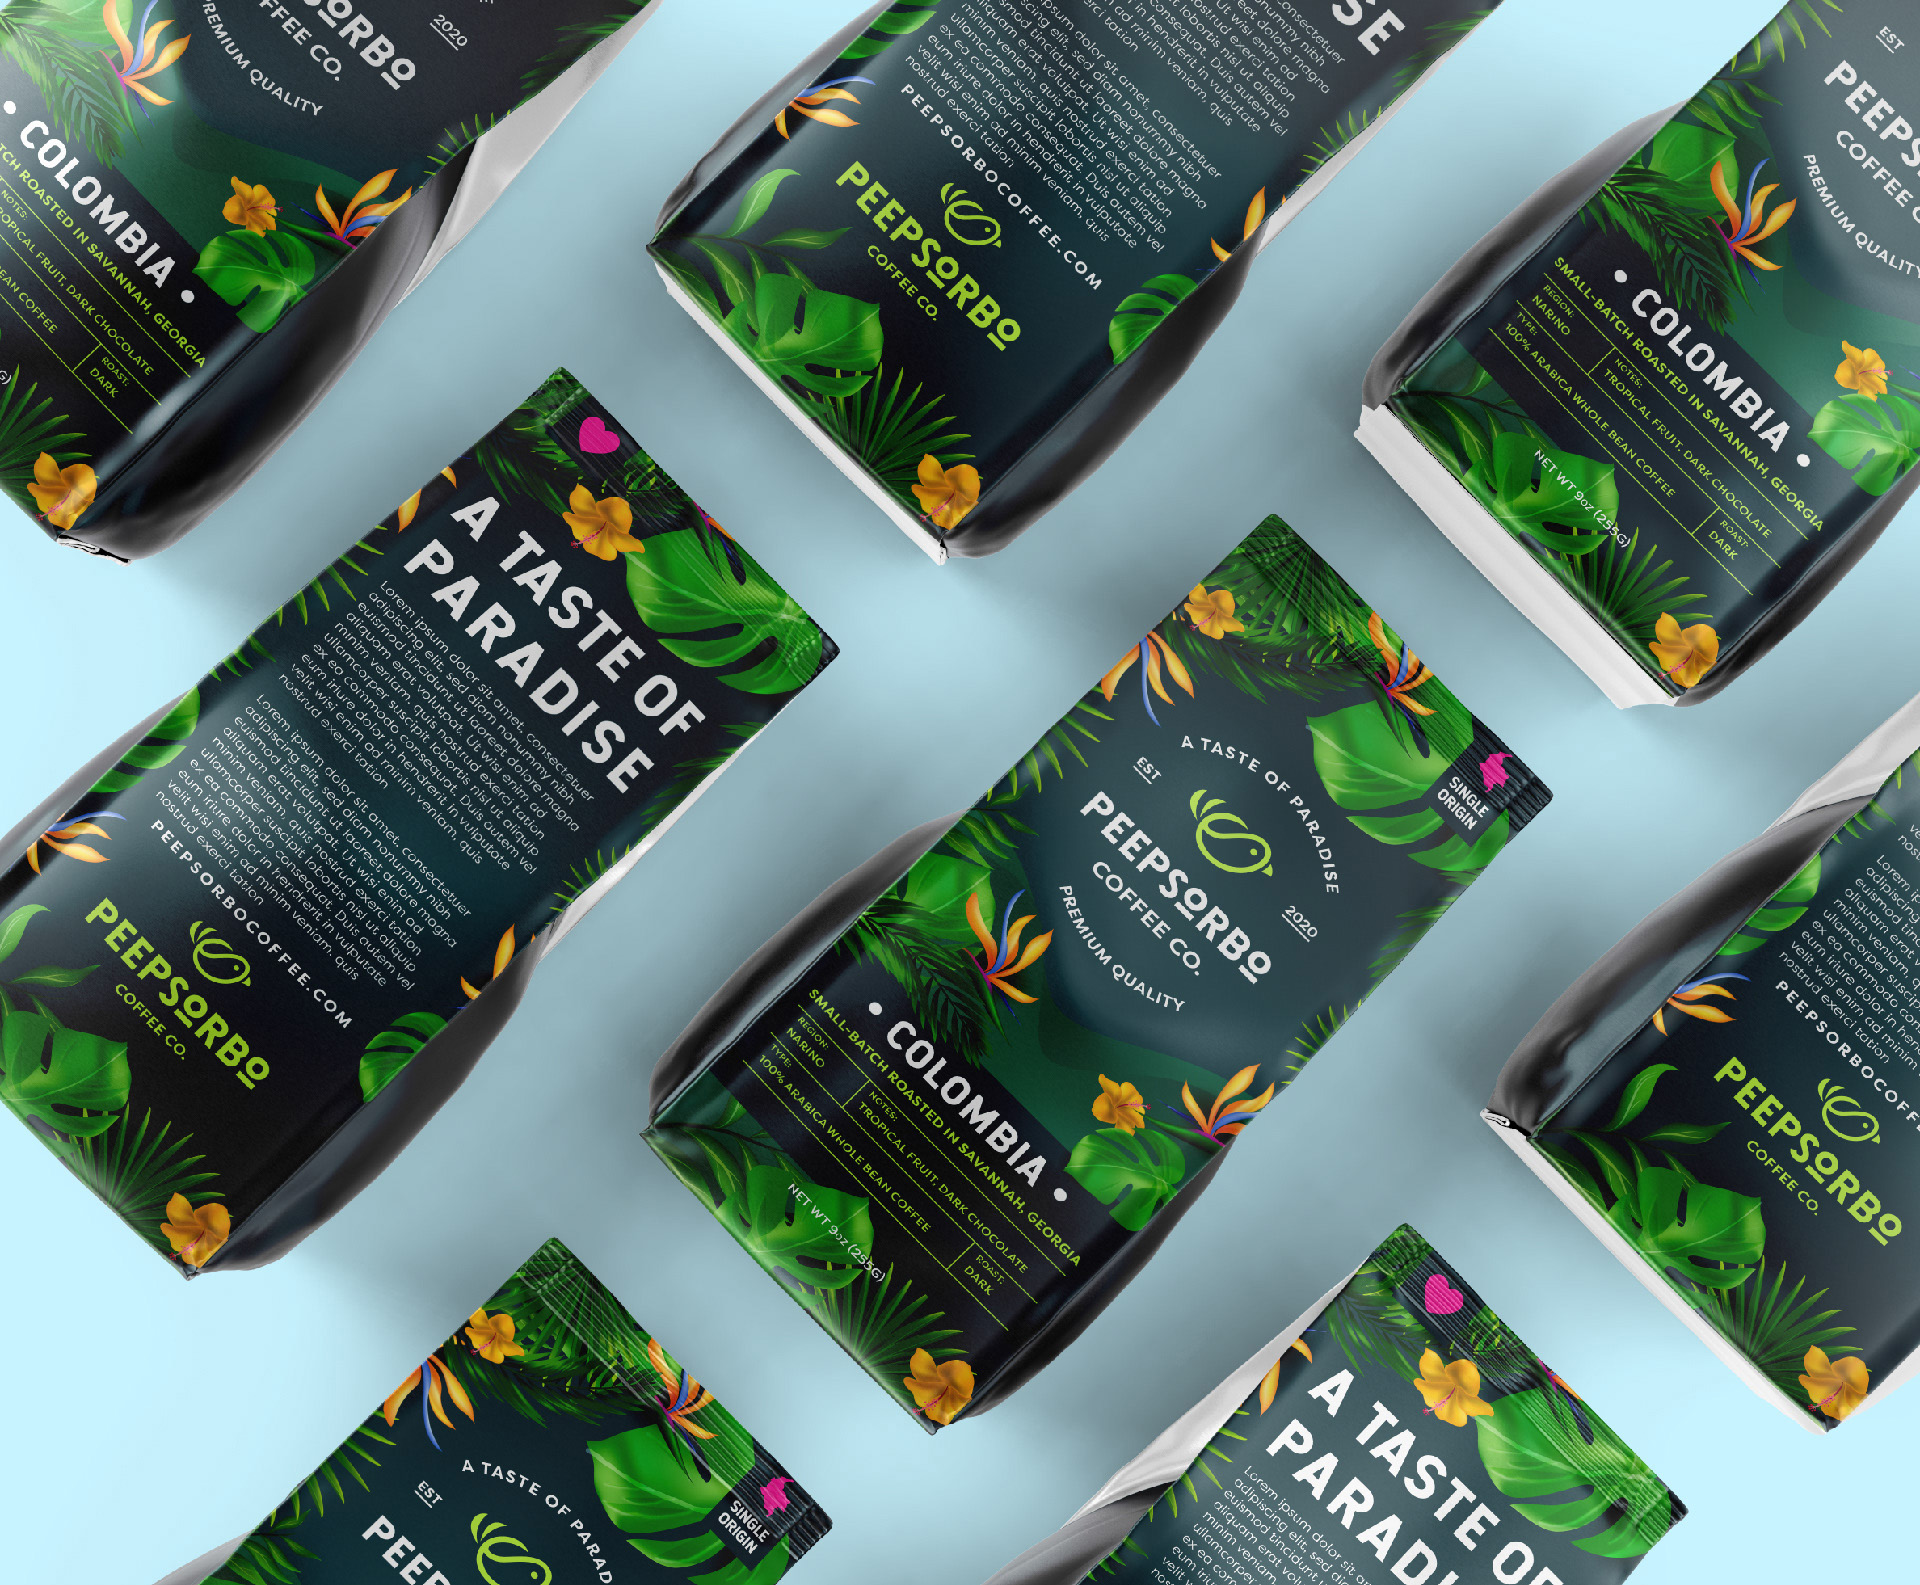 Peepsorbo Branding and Packaging Design Concept